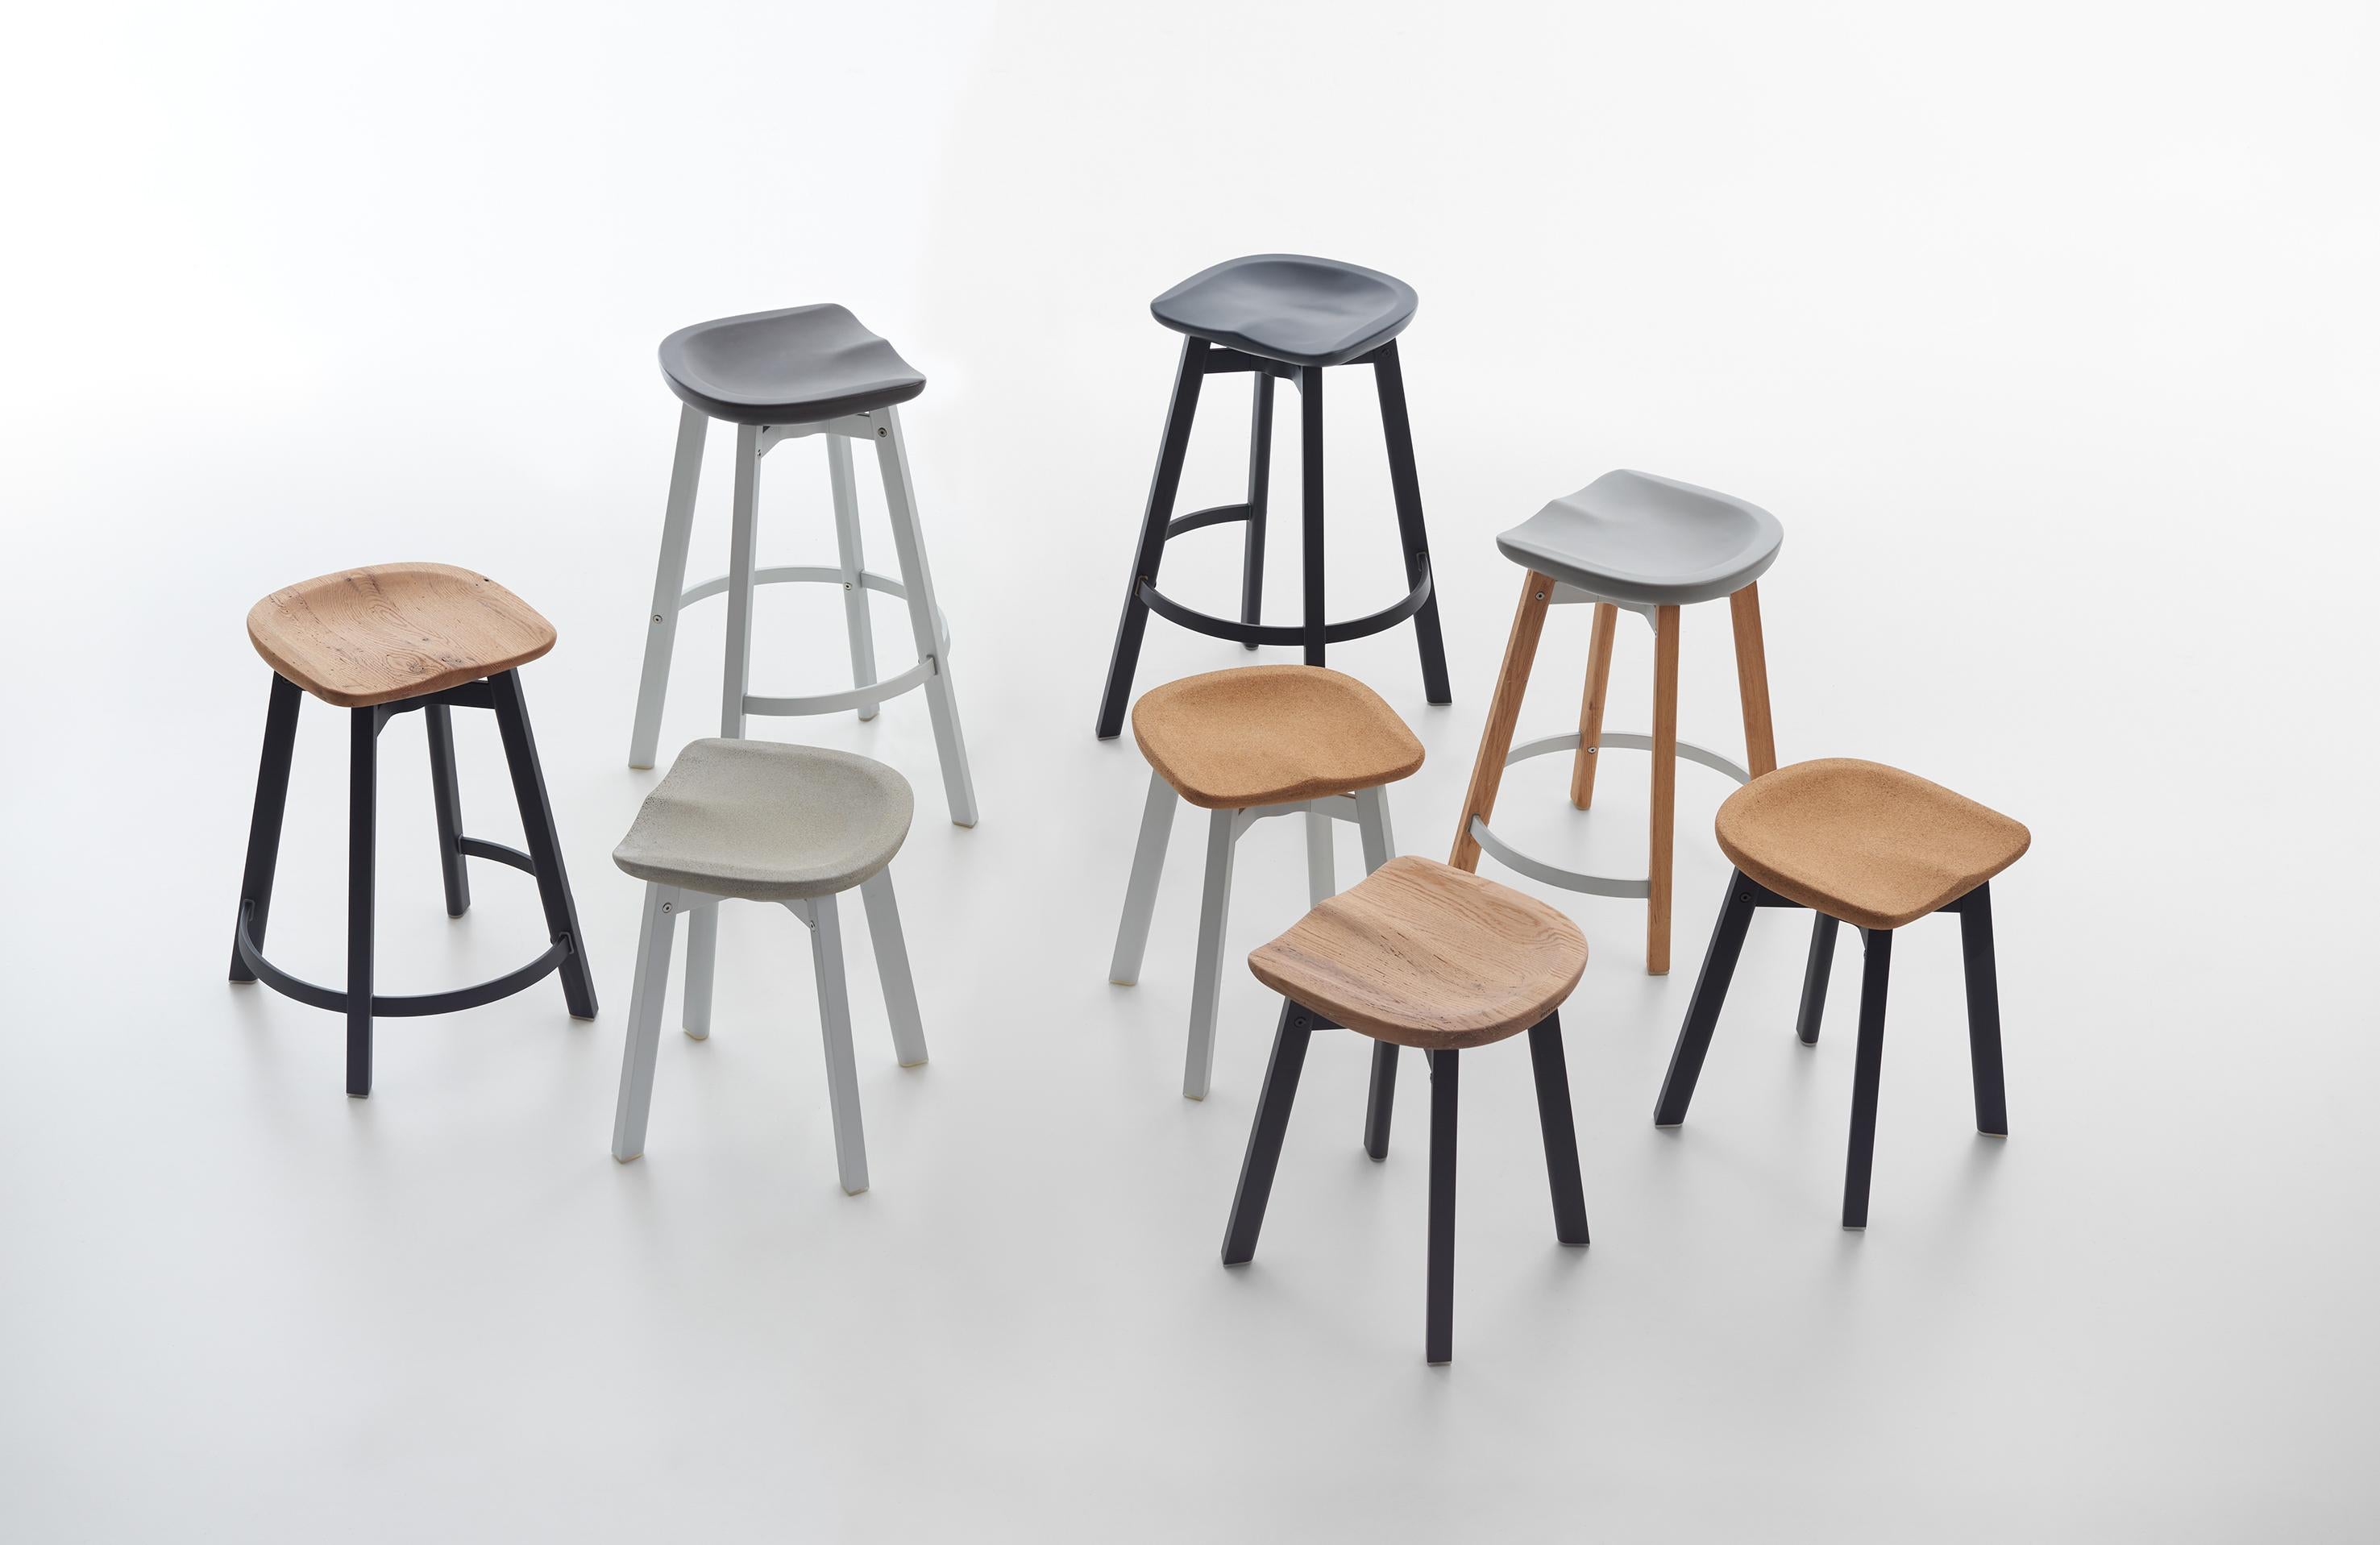 American Emeco Su Small Stool in Wood with Flint Seat by Nendo